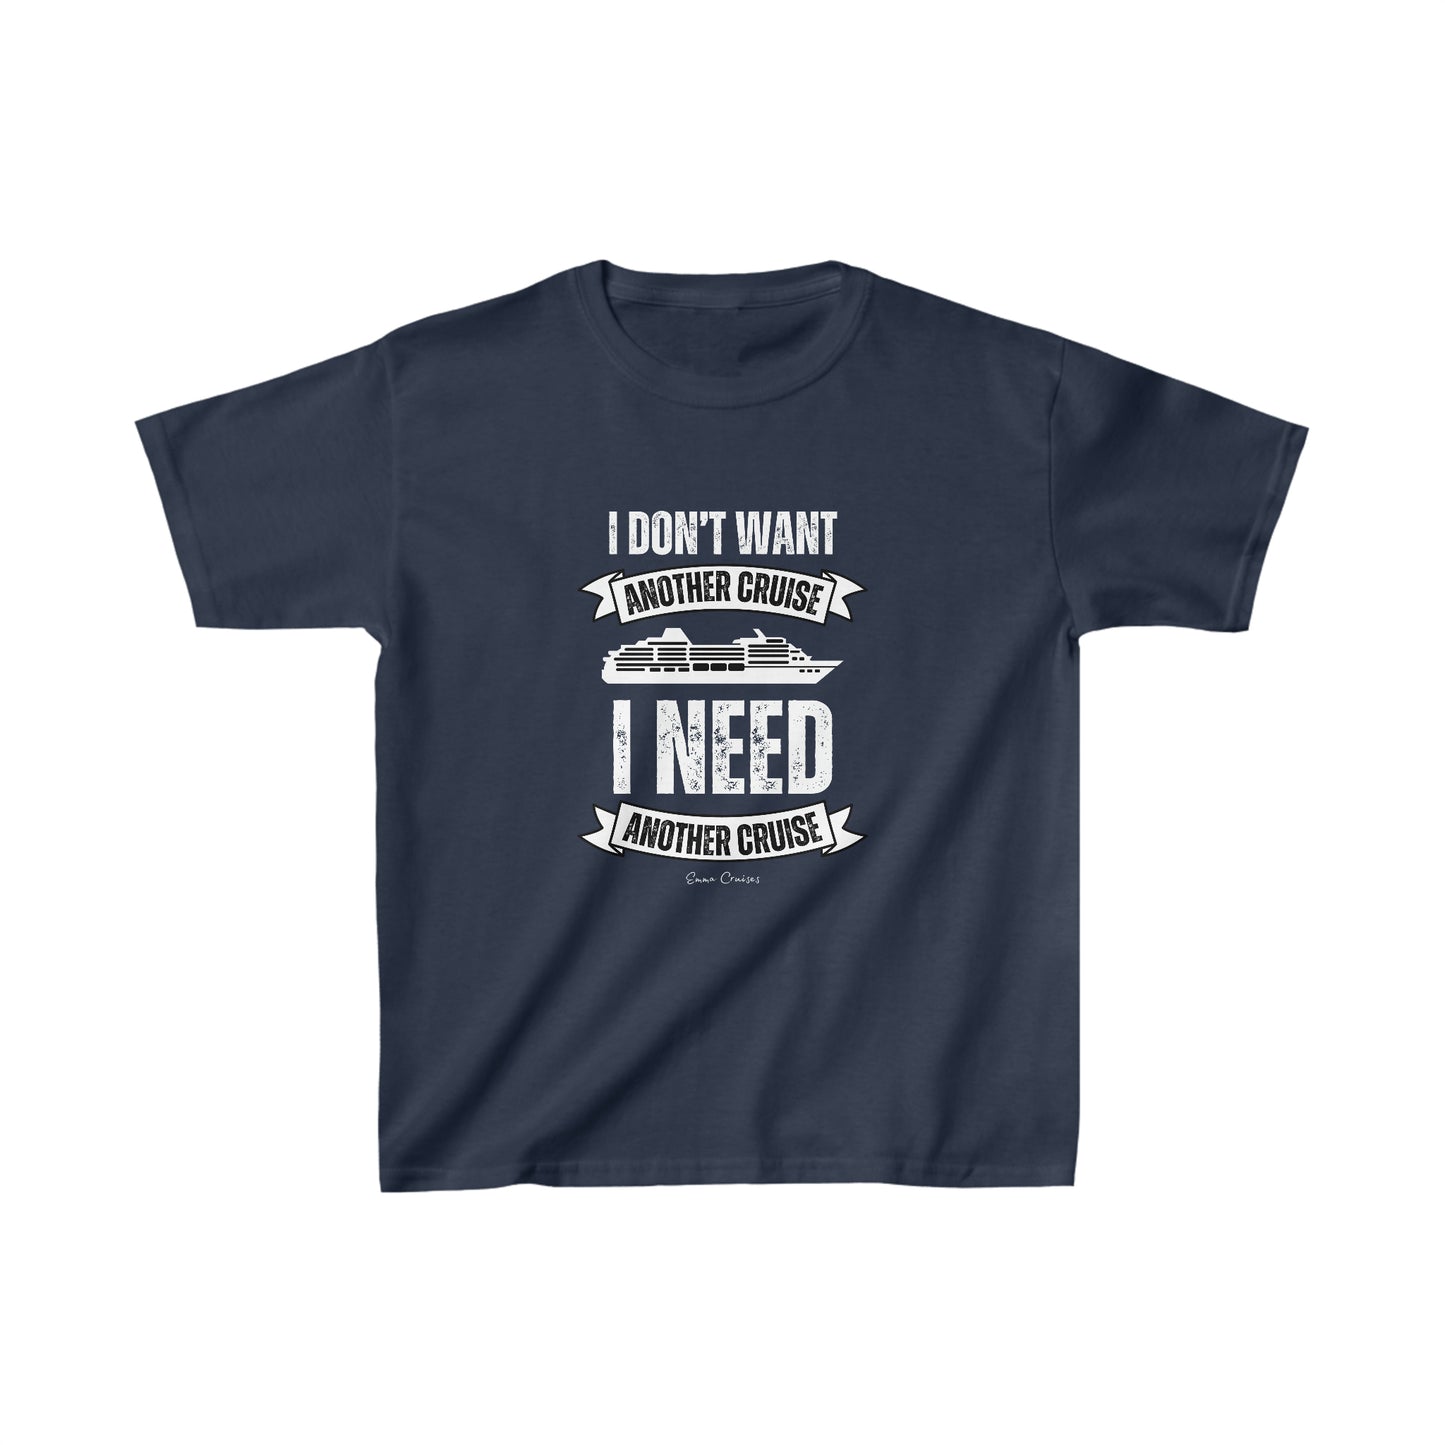 I Don't Want Another Cruise - Kids UNISEX T-Shirt